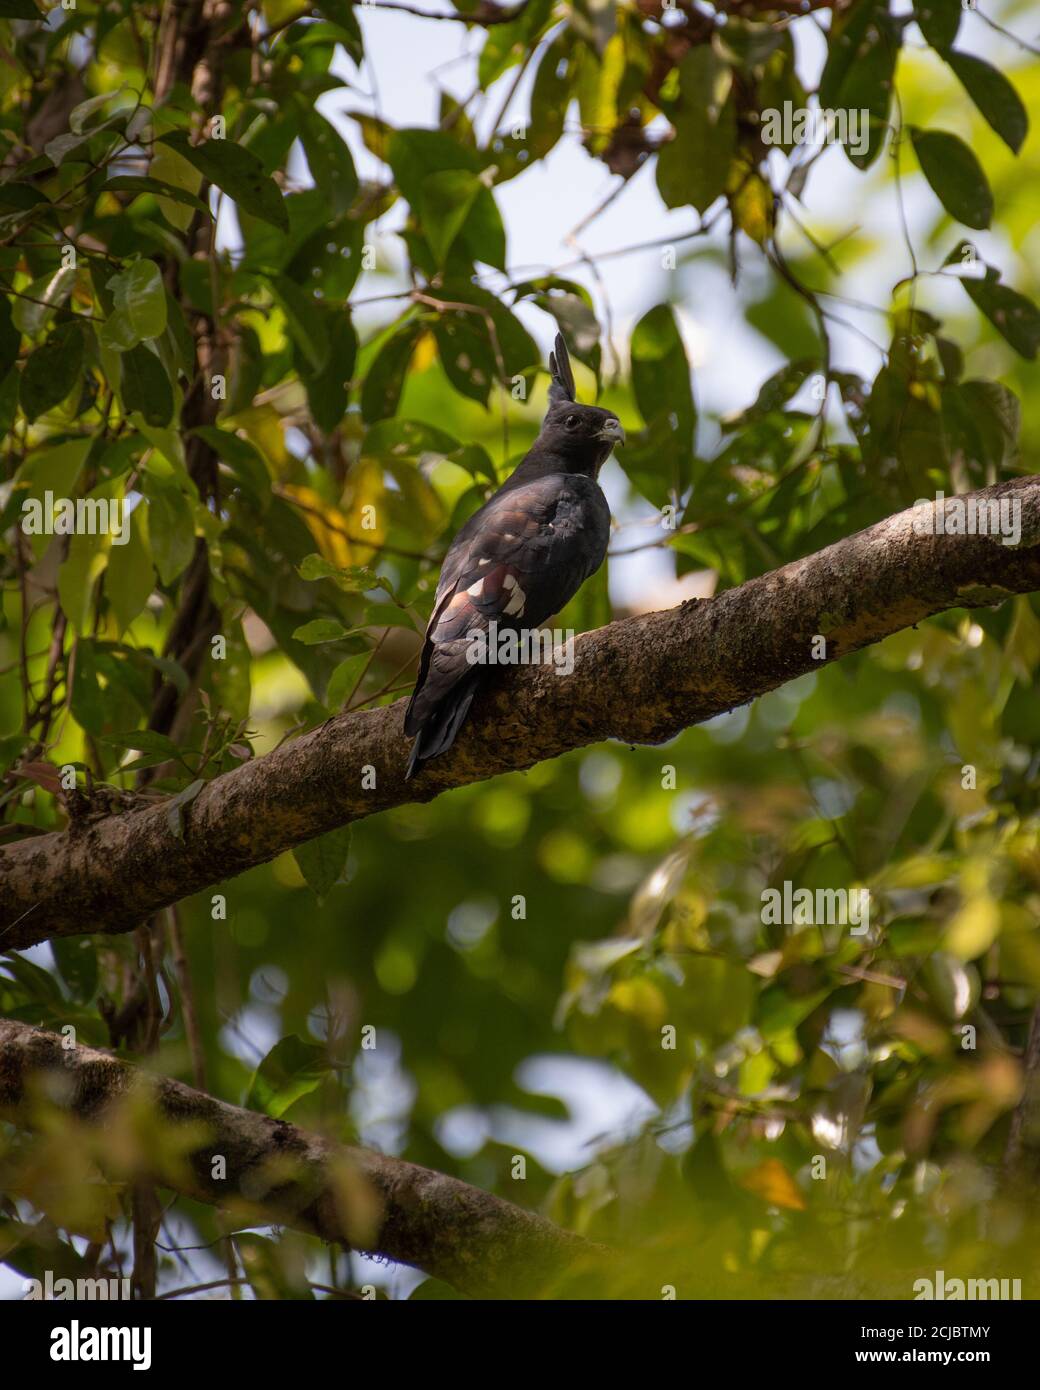 A Black baza (Aviceda leuphotes), with its prominent crest and is perched on a tree branch with dense foliage in the background in the forests of That Stock Photo